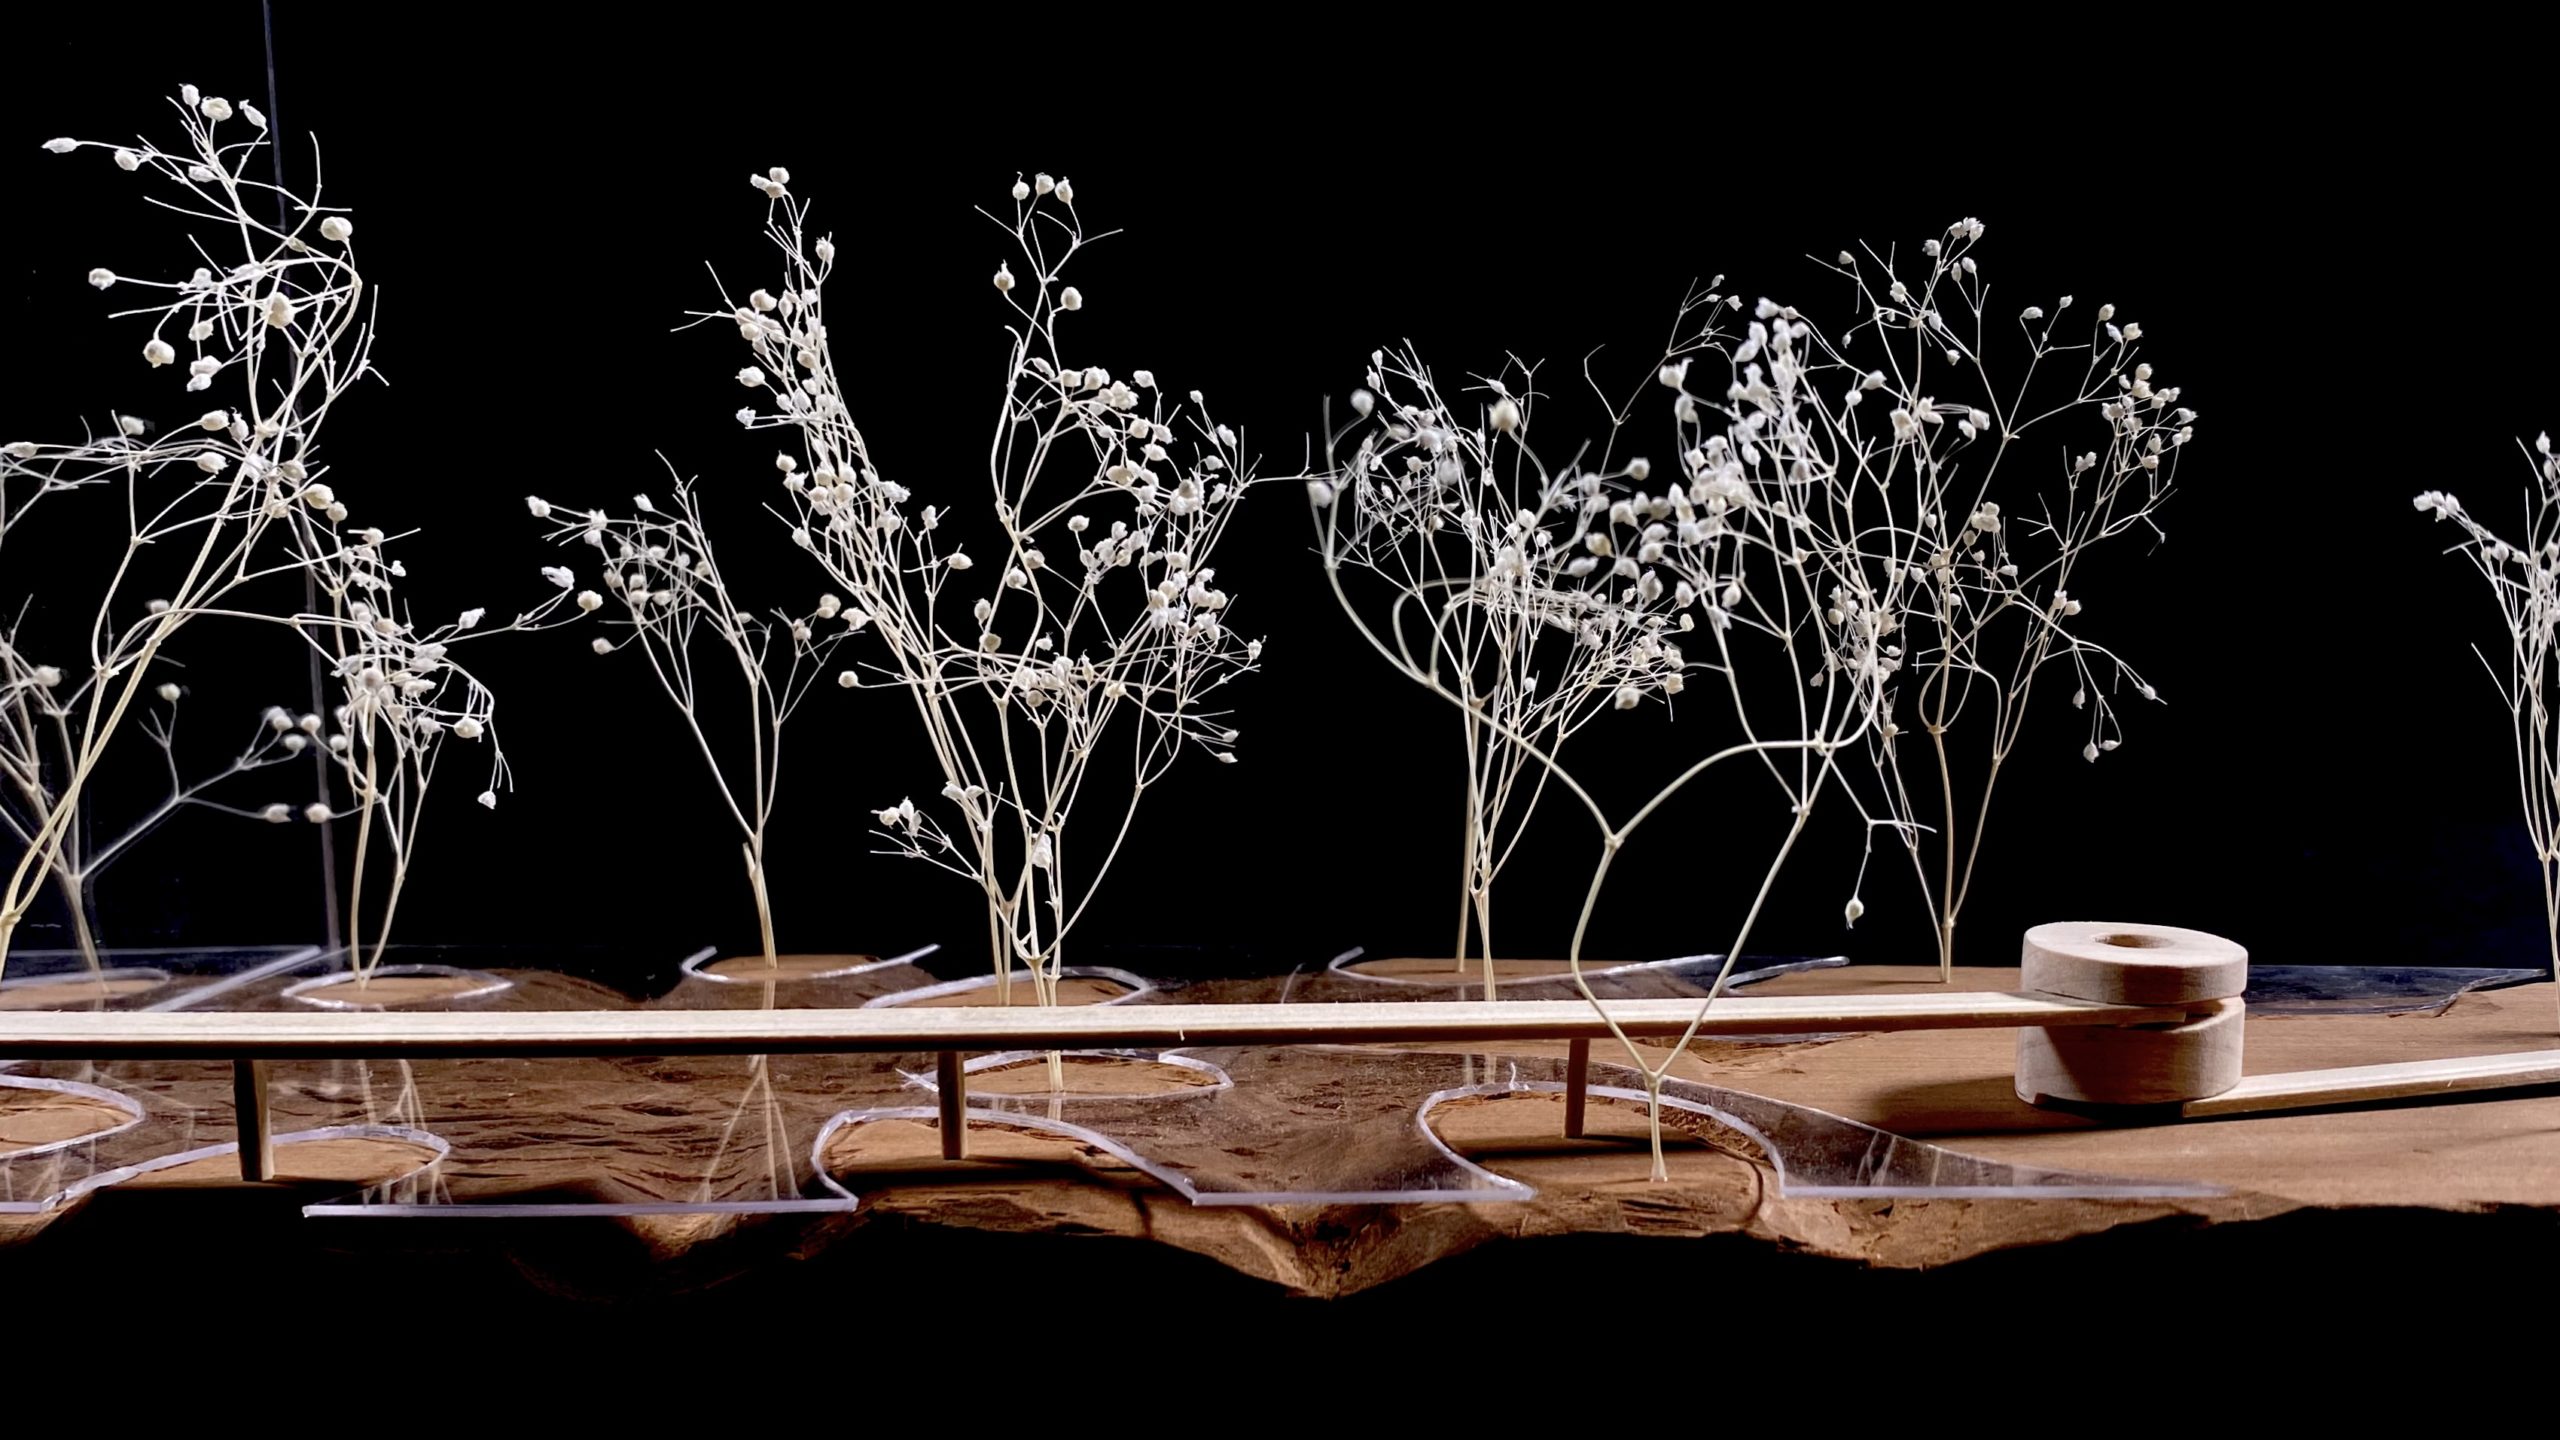 Model of structures among trees.